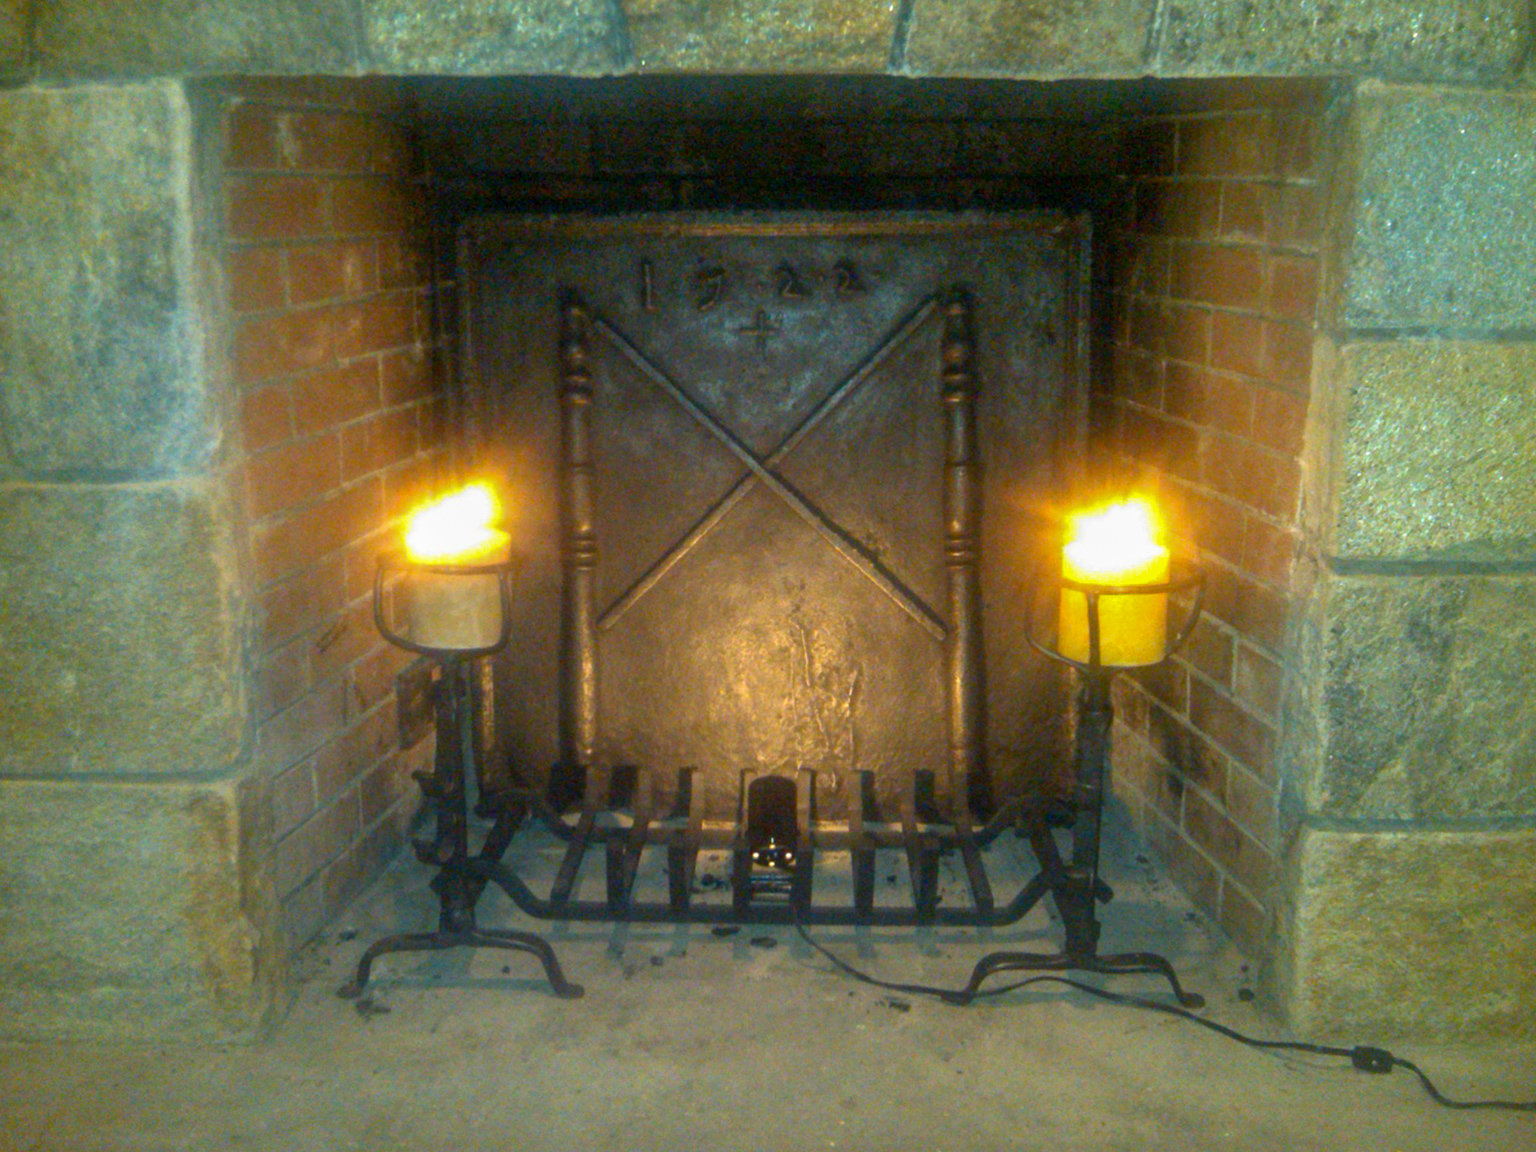 Unused fireplace with decorations